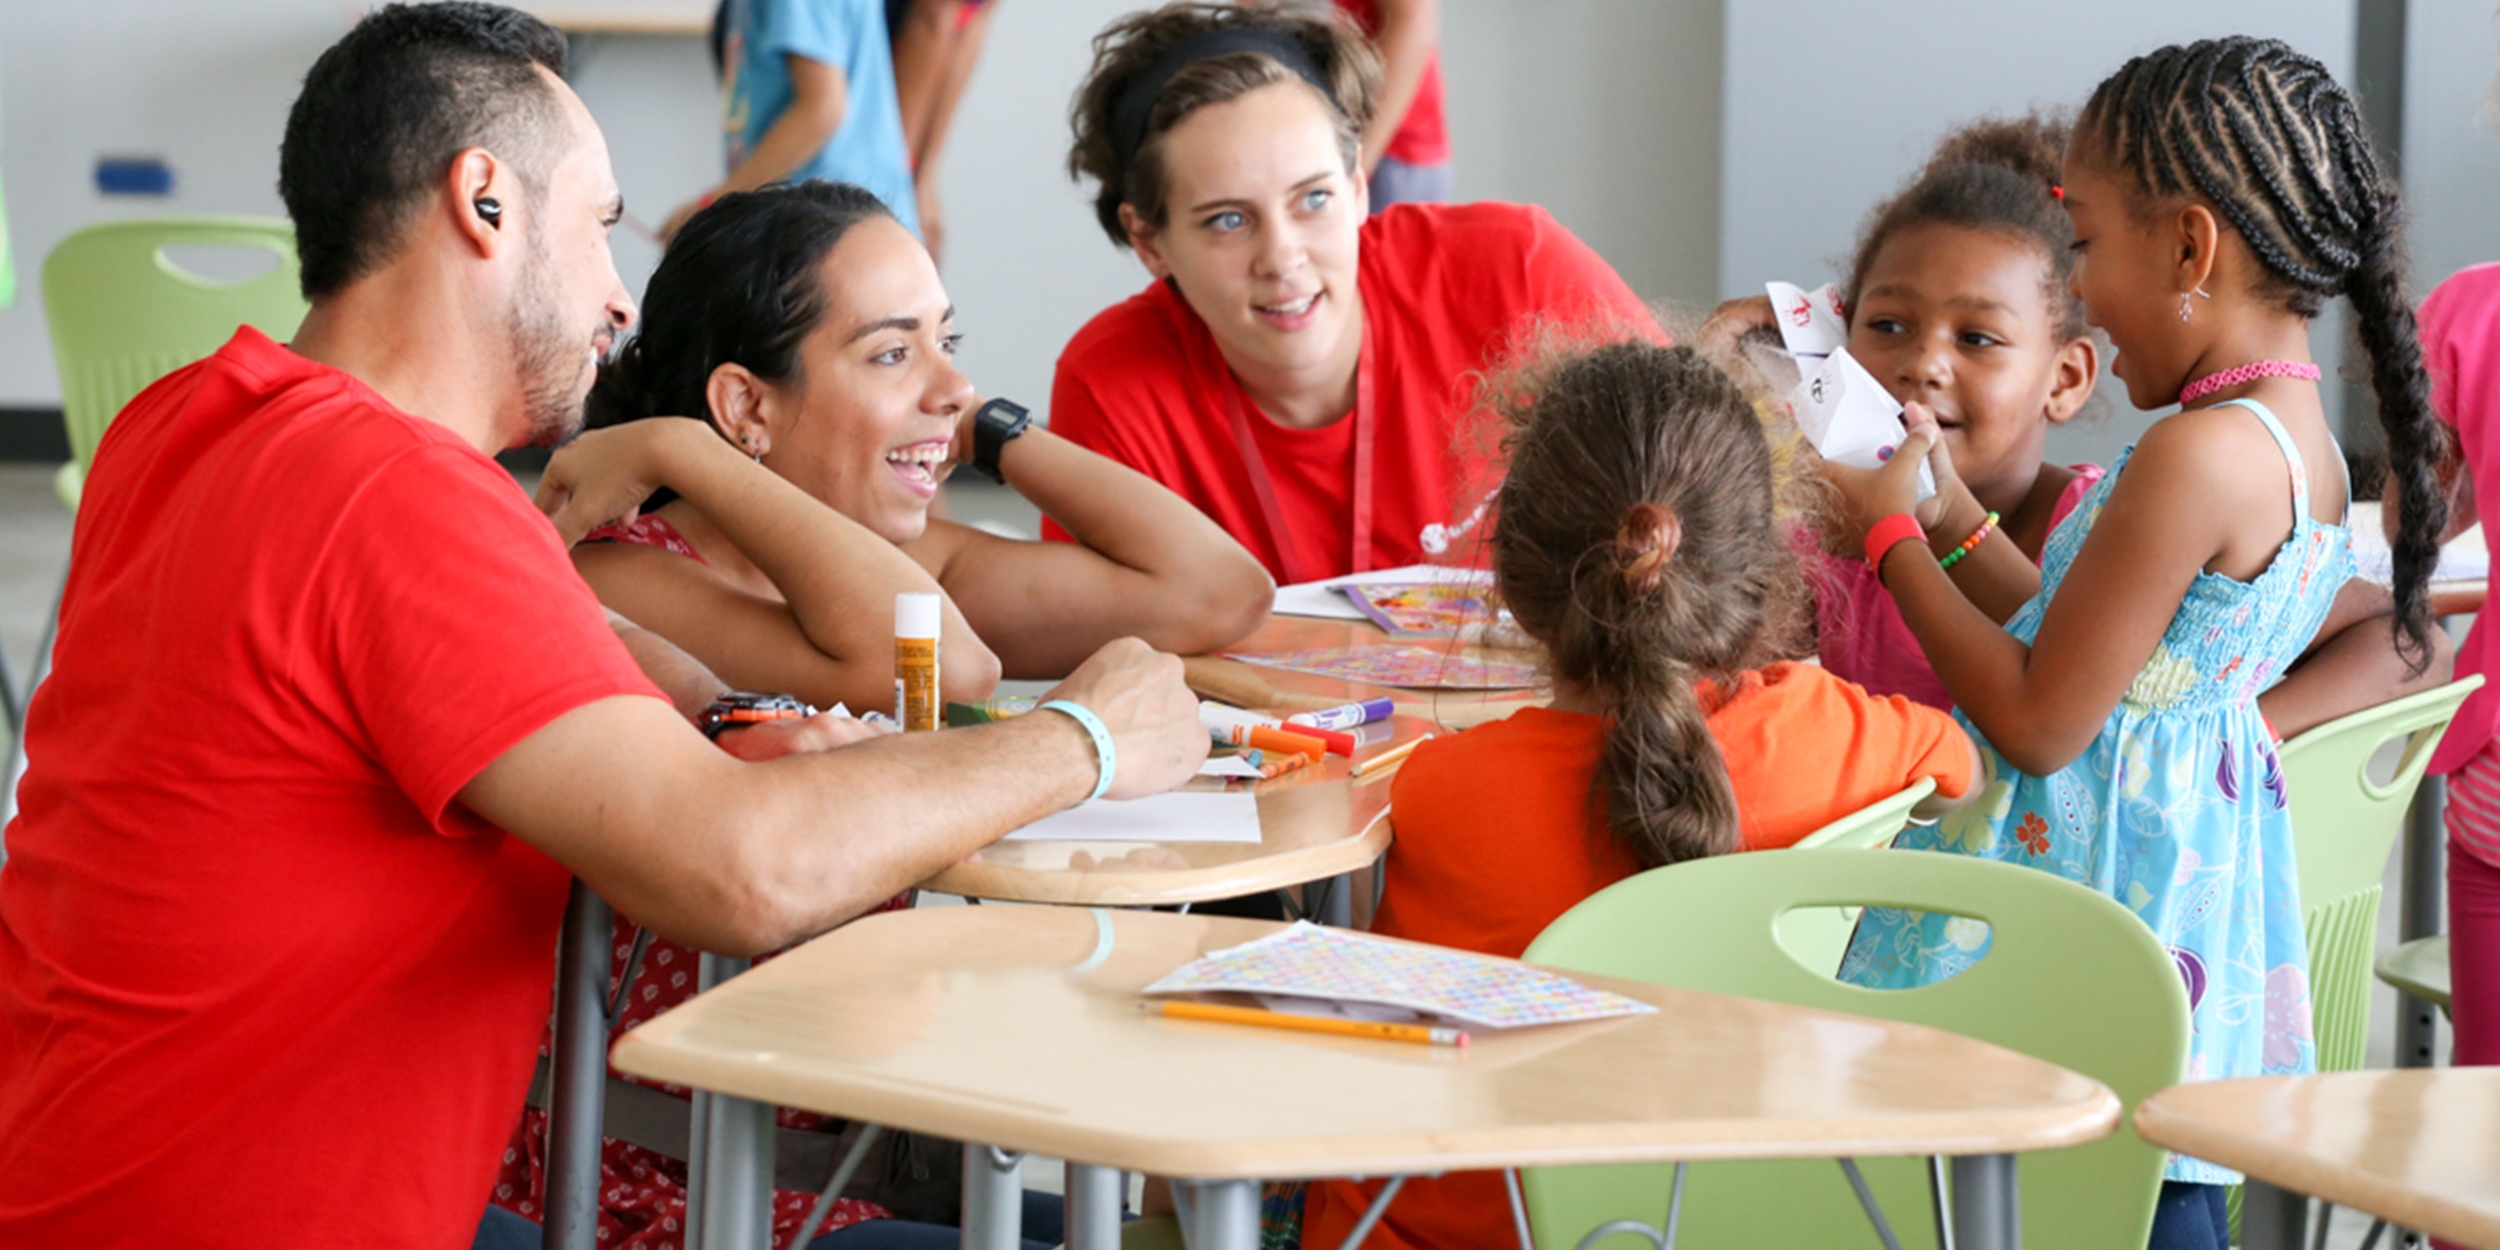 Save the Children staff members interact with children at a child-friendly space in Canovanas, Puerto Rico. Playing helps them recover from the trauma they experienced from Hurricane Maria. Photo credit: Save the Children, September 2017.  